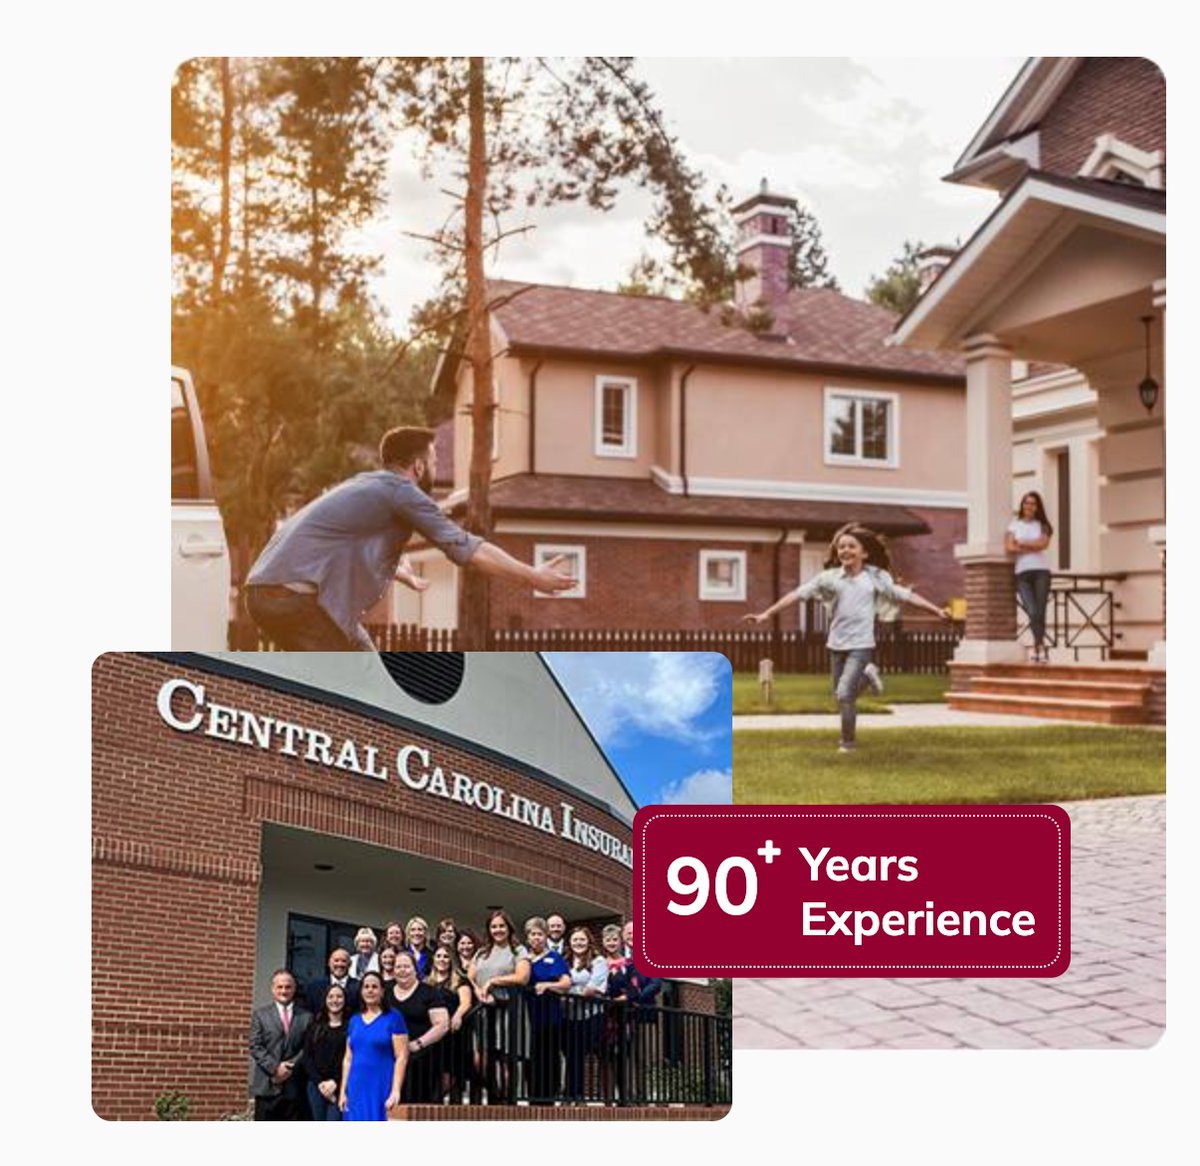 Welcome to Central Carolina Insurance Agency, your reputable independent insurance agency since 1931. 

#CentralCarolinaInsurance #NorthCarolinaInsurance #NCInsurance #NorthCarolinaBusiness #RiskManagement #UmbrellaInsurance #InsuranceAgency #PersonalInsurance #BusinessInsuran...